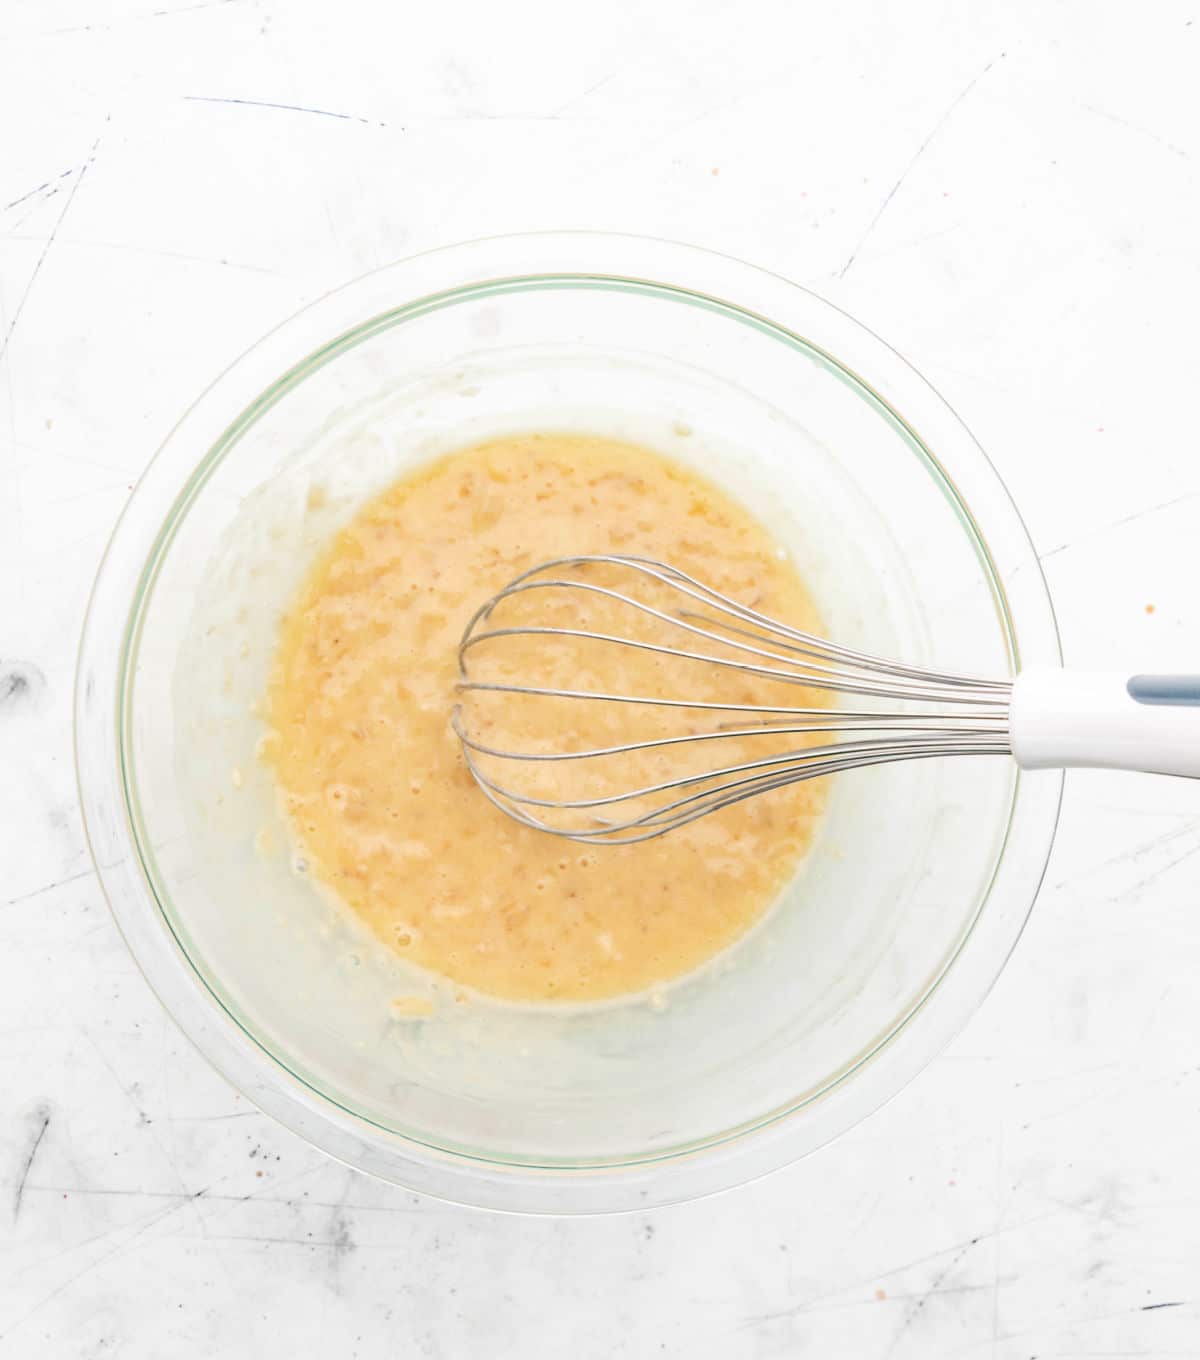 Mashed banana whisked into egg and oil mixture. 